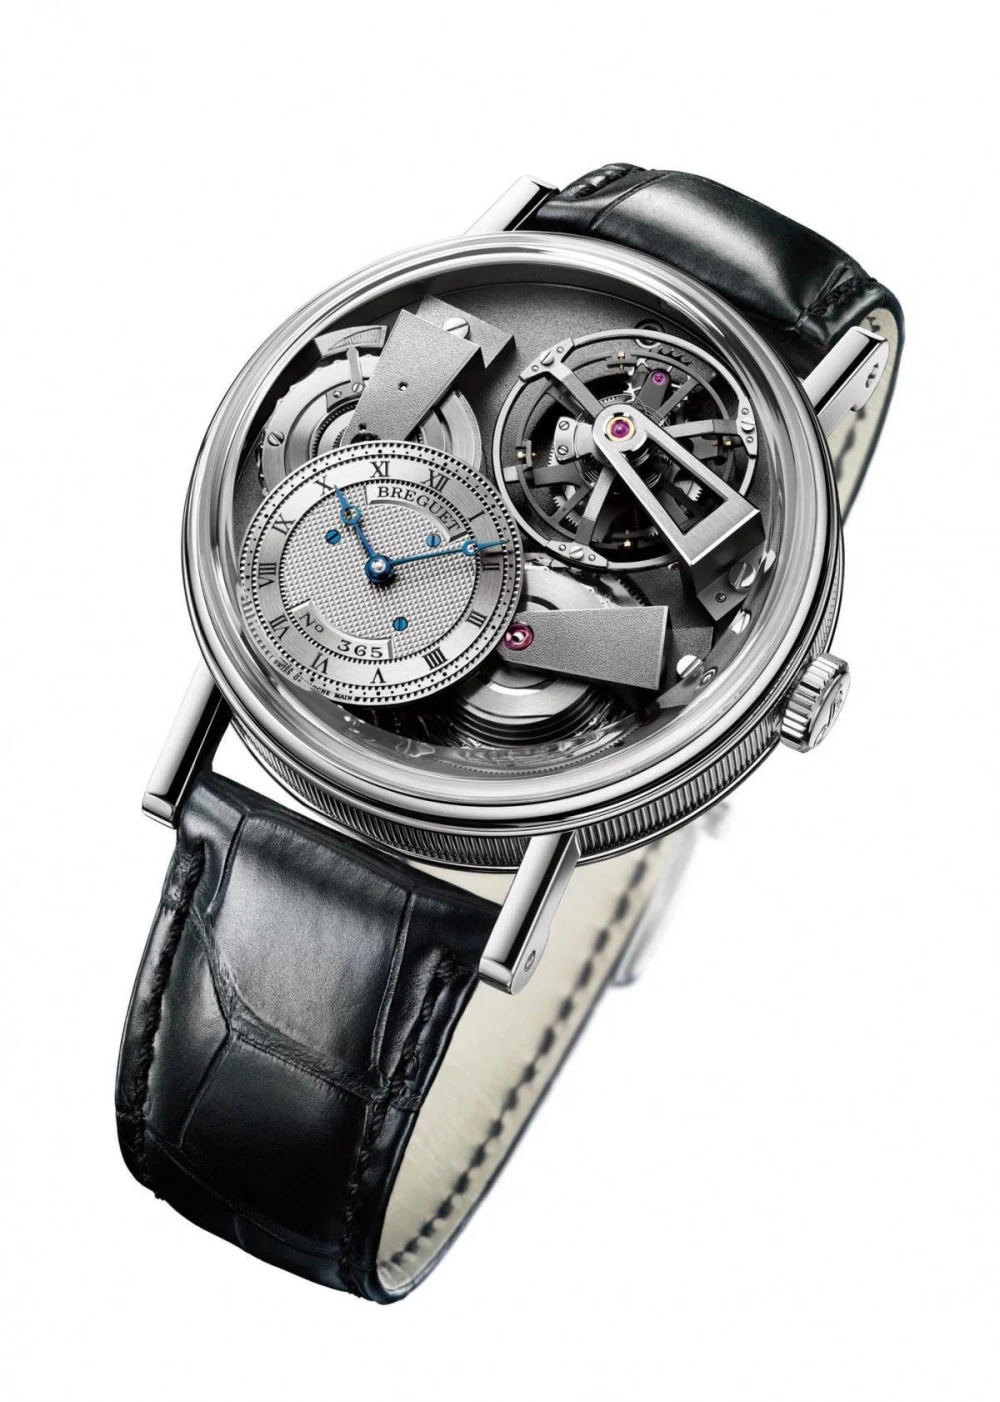 ‘Holy Horology Batman!’ – Who wore it best? 7047PT Tradition Fusee Tourbillon